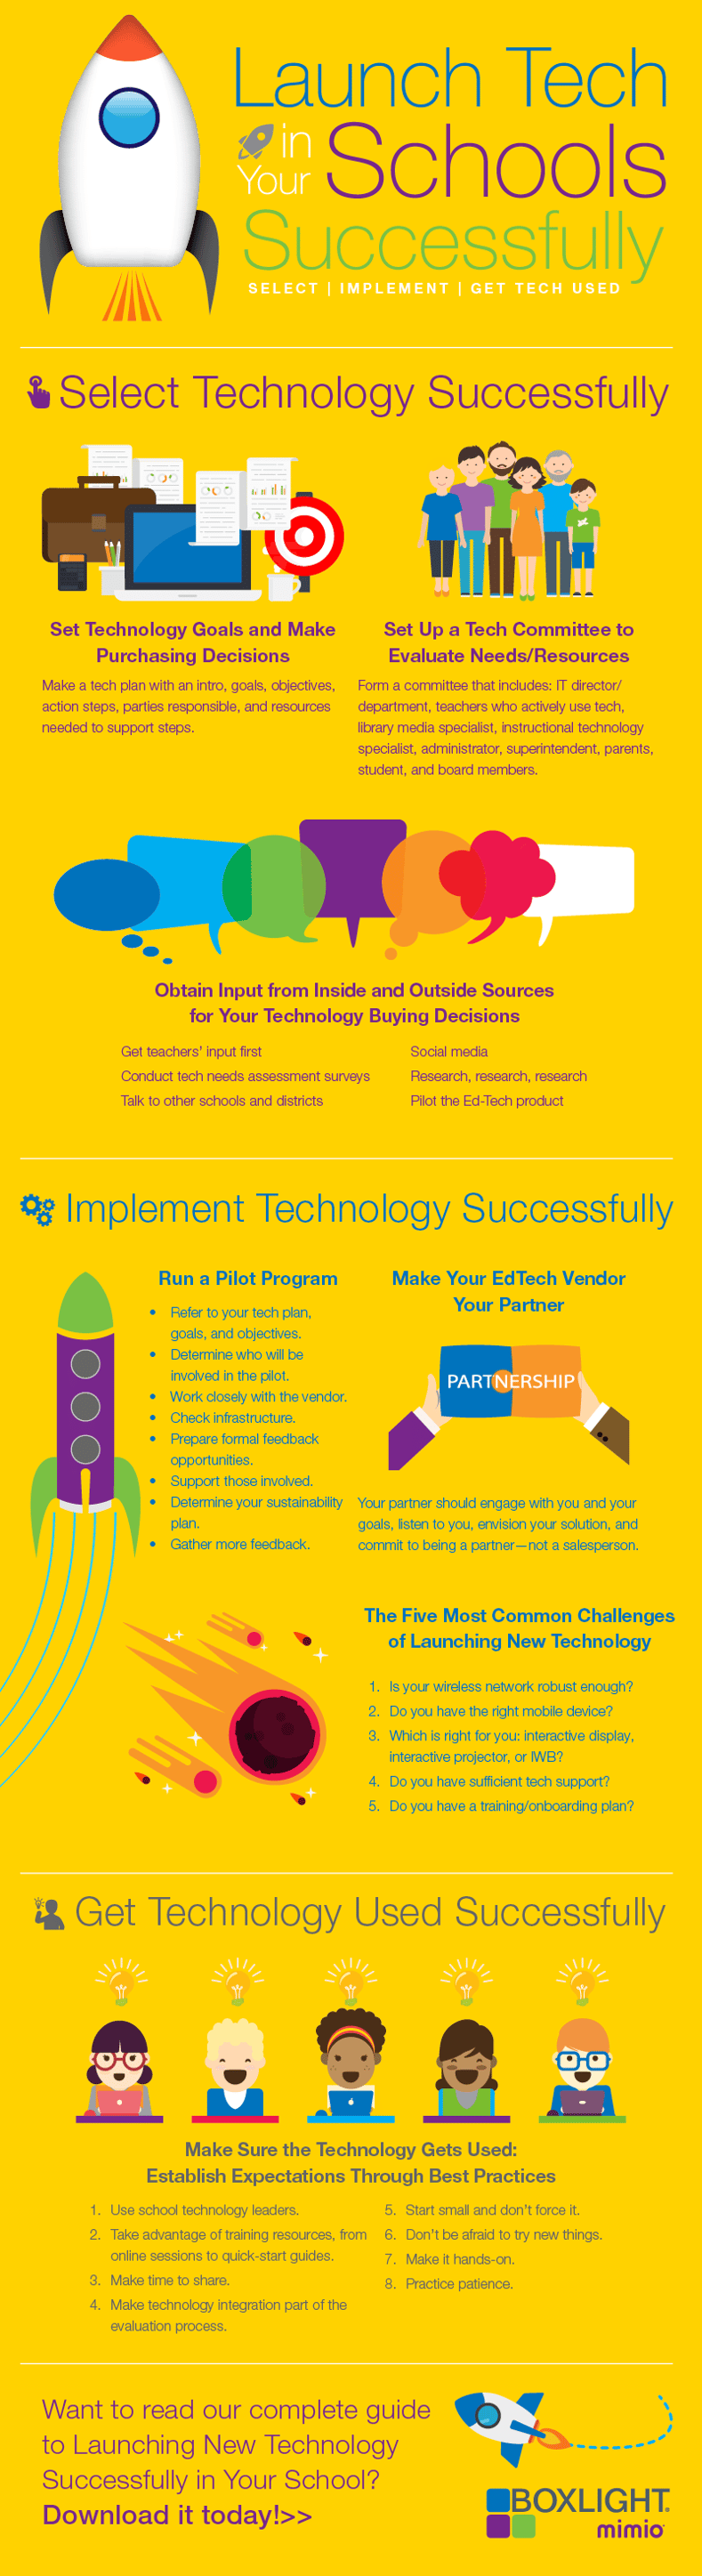 LaunchTechSuccessfully_Infographic.png